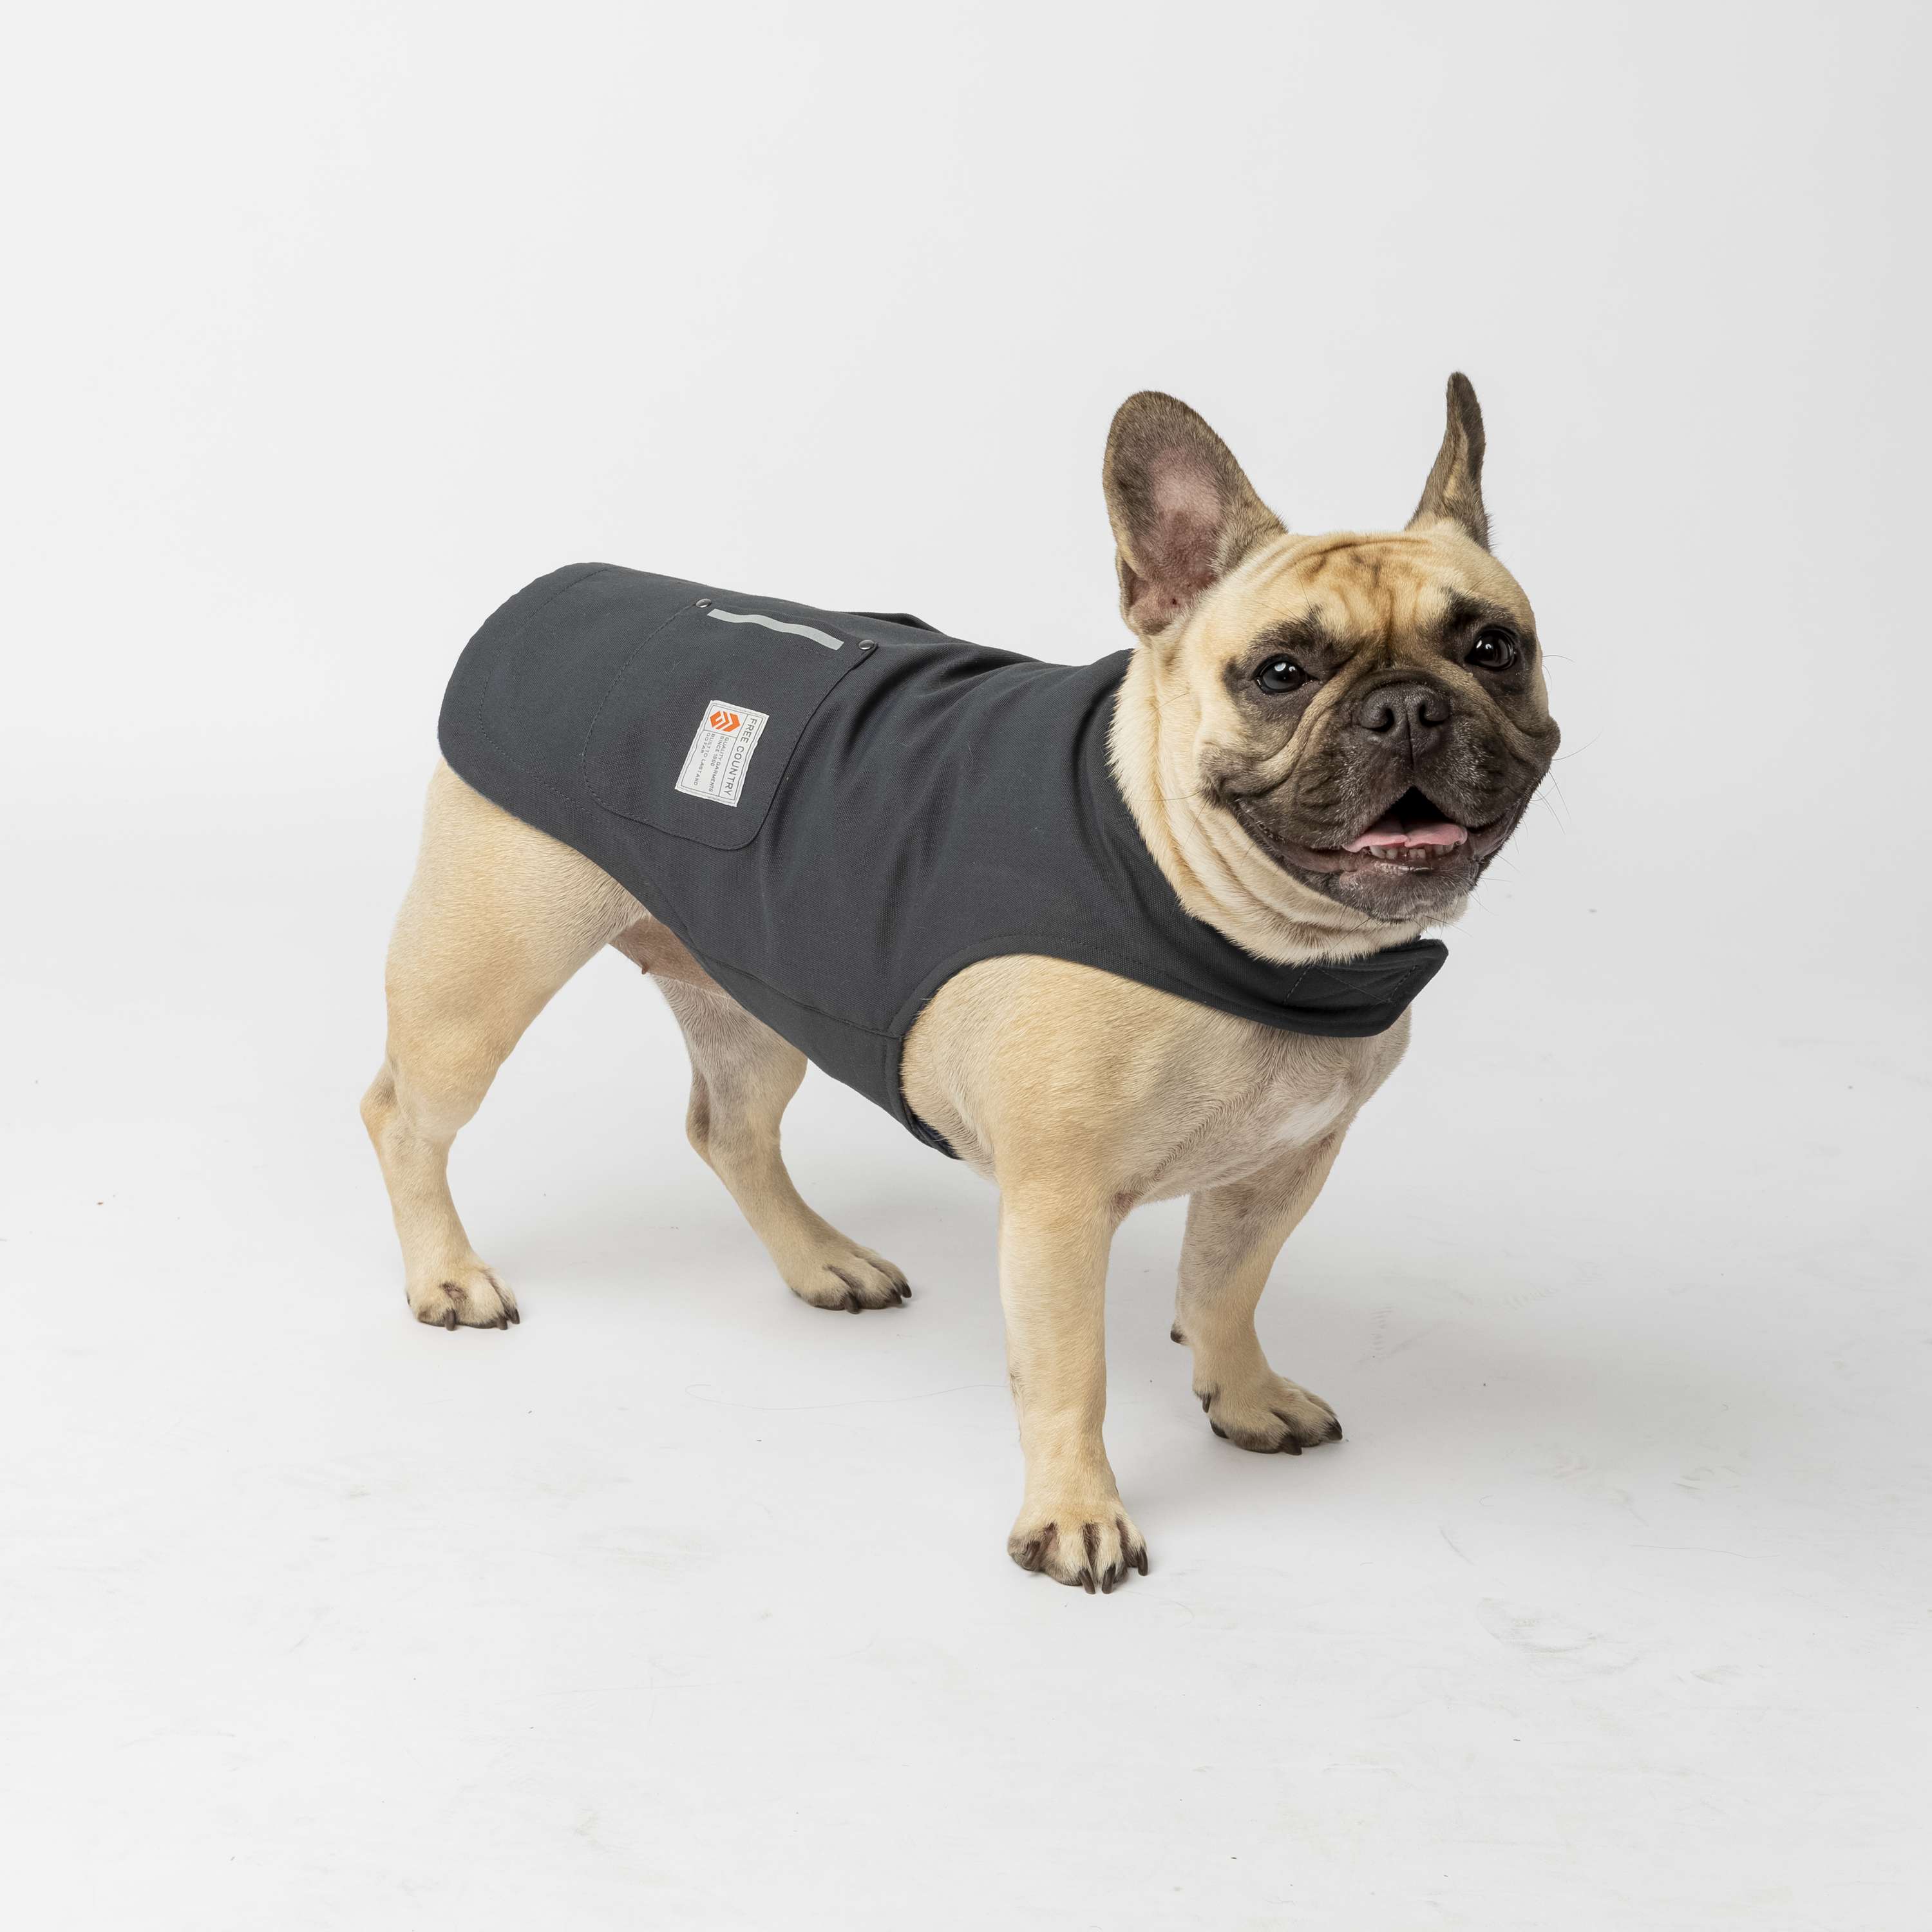 Free Country Canvas Dog Jacket – Large, Gray, Indoor/Outdoor Pet Clothing for Comfort, Warmth, and Lightweight